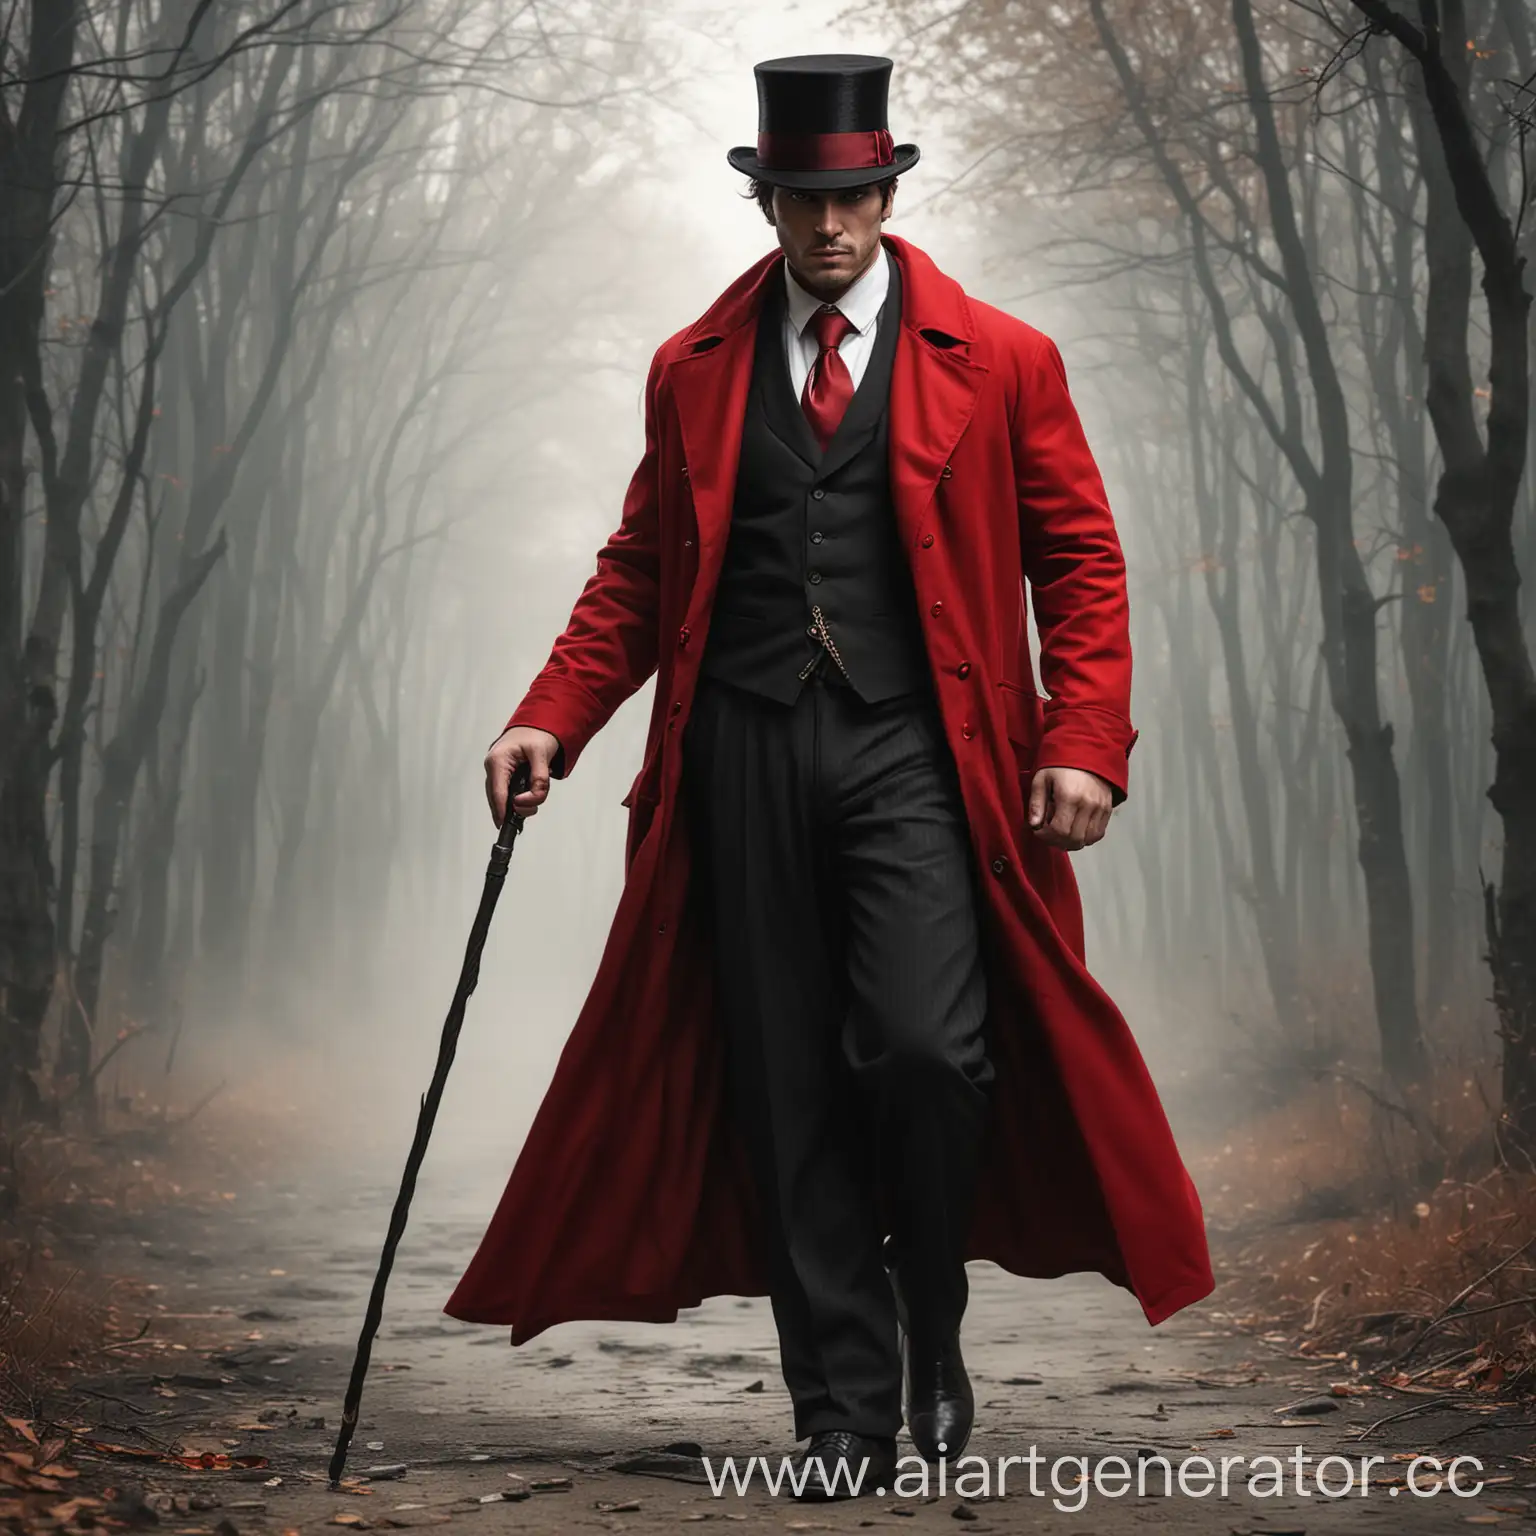 Mafia-Boss-in-Red-Cloak-with-Top-Hat-and-Cane